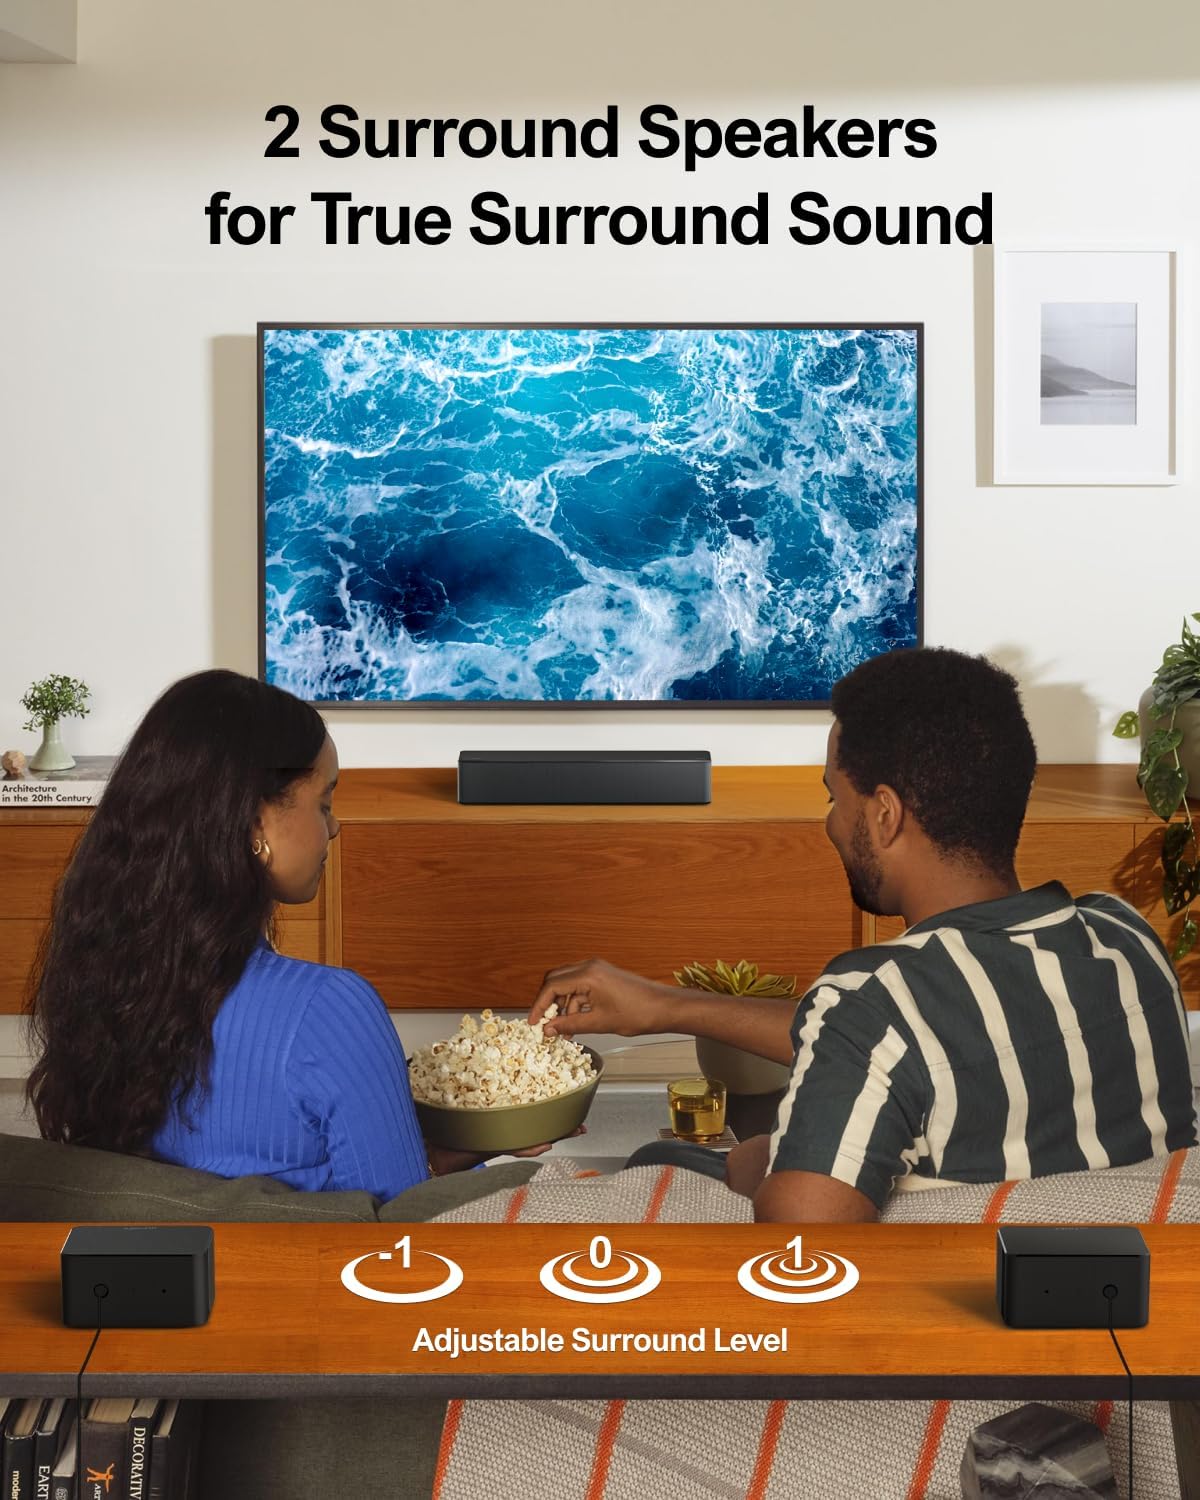 ULTIMEA 5.1 Dolby Atmos Home Theater Sound Bar, Surround Sound Bars for TV with Wireless Subwoofer, 3D Surround Sound System, Surround and Bass Adjustable, Poseidon D60, 2023 Model